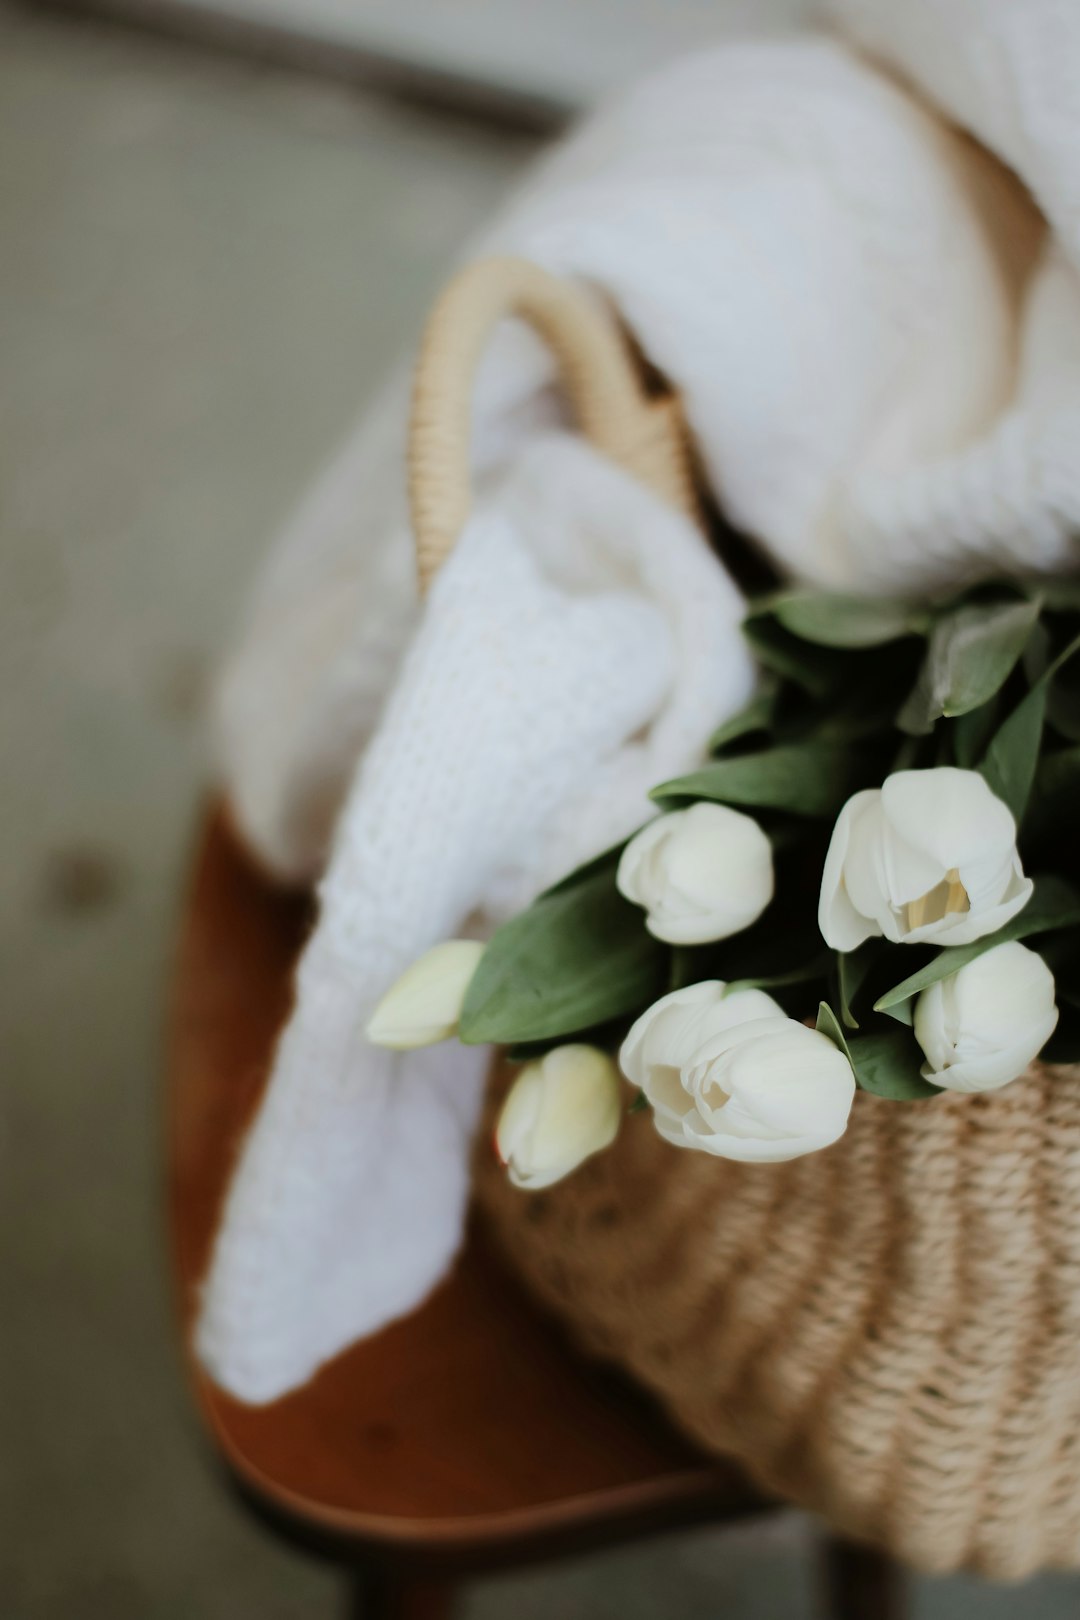 white roses on brown woven basket